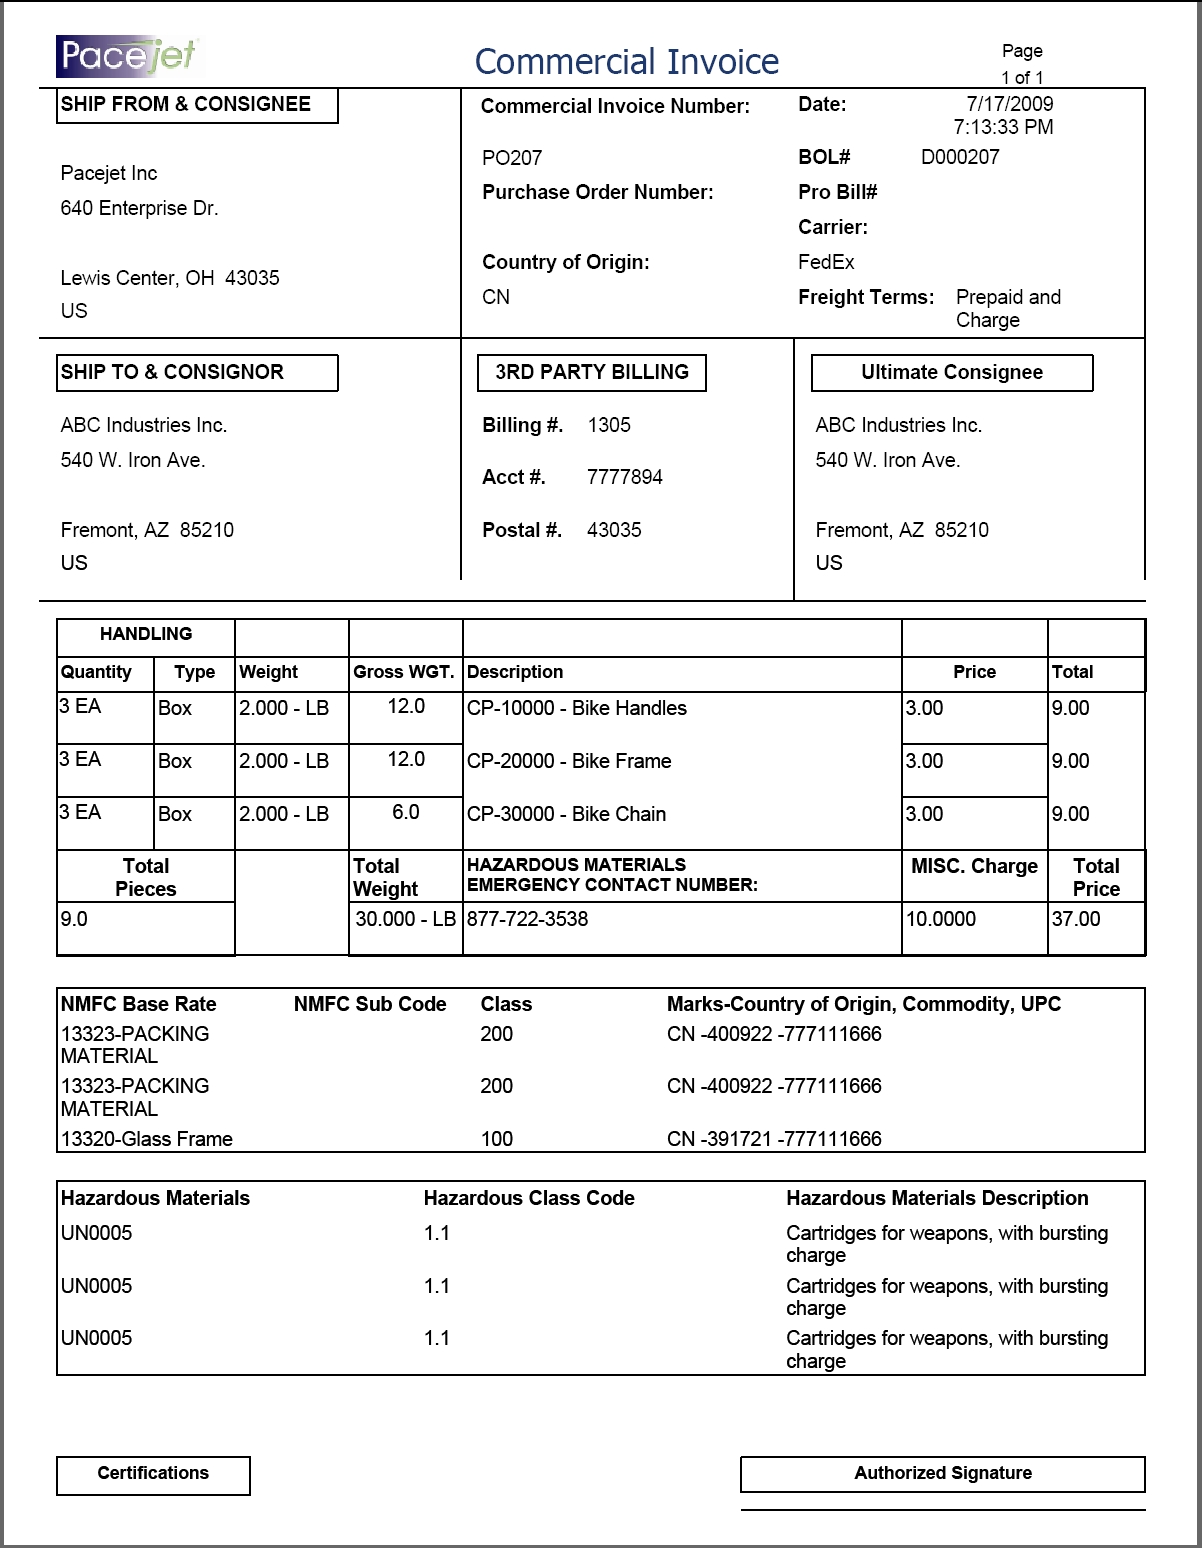 commercial invoice for export export shipping pacejet 1202 X 1548